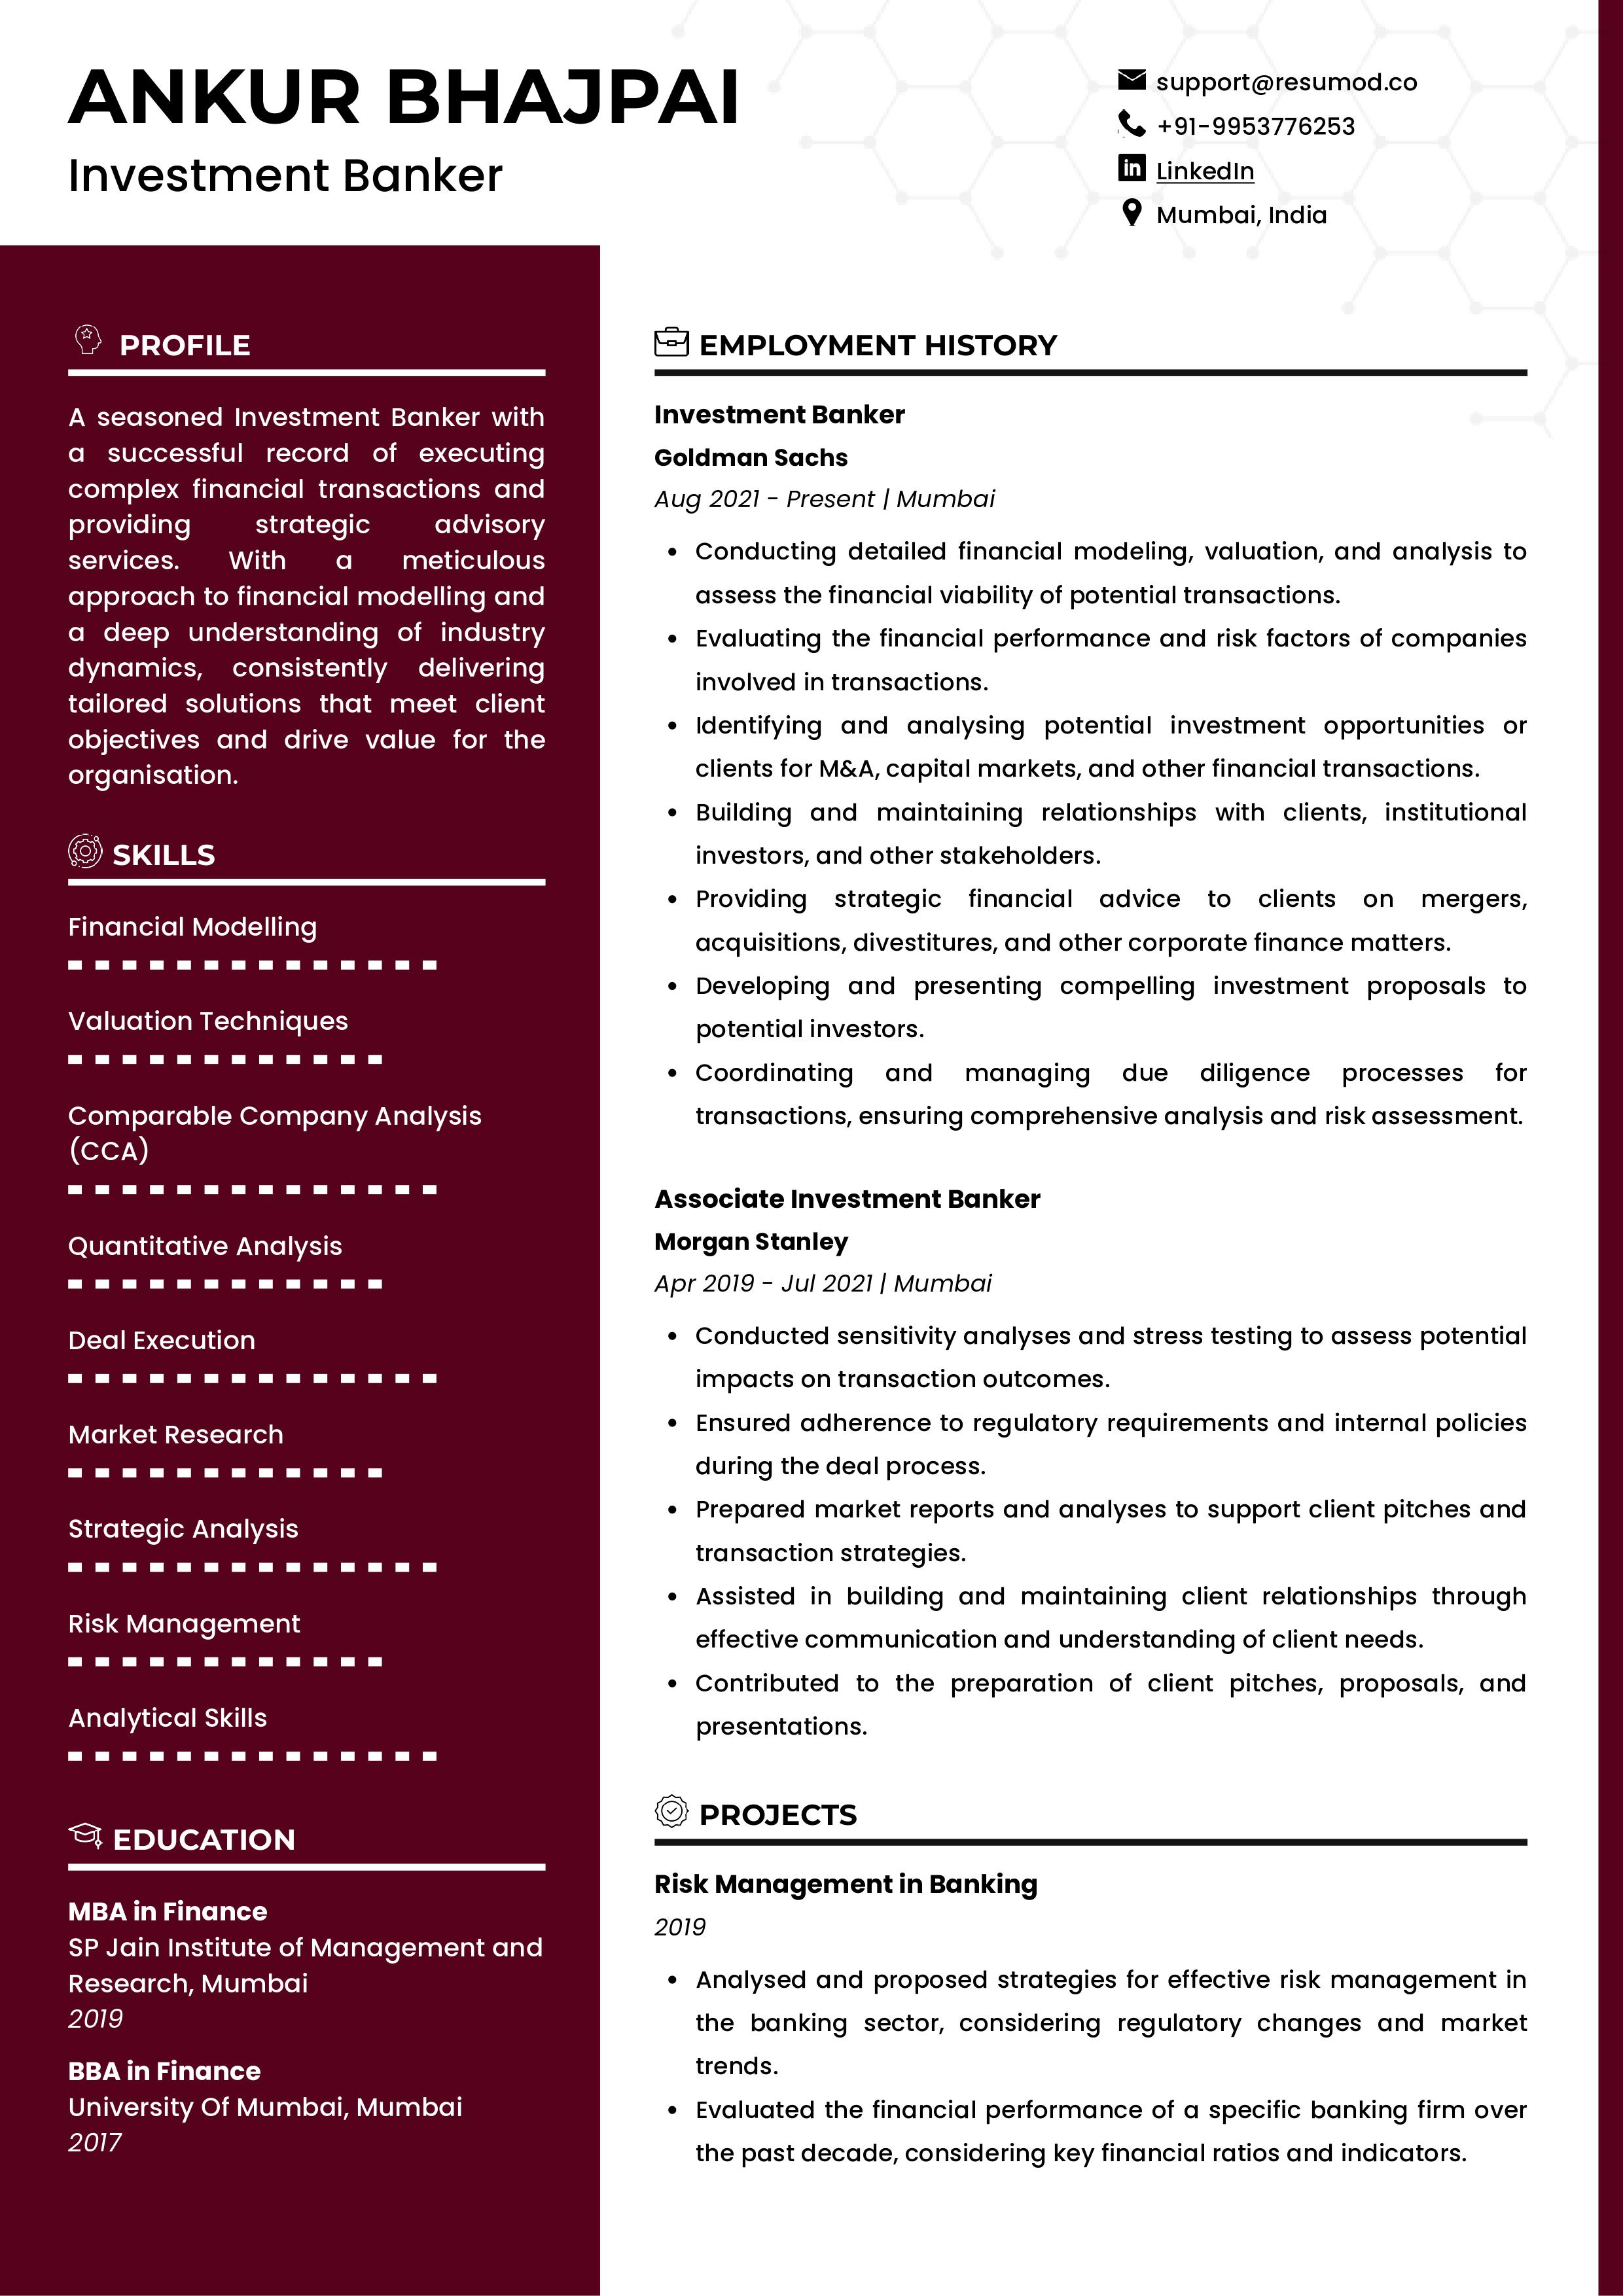 Sample Resume of Investment Banker | Free Resume Templates & Samples on Resumod.co